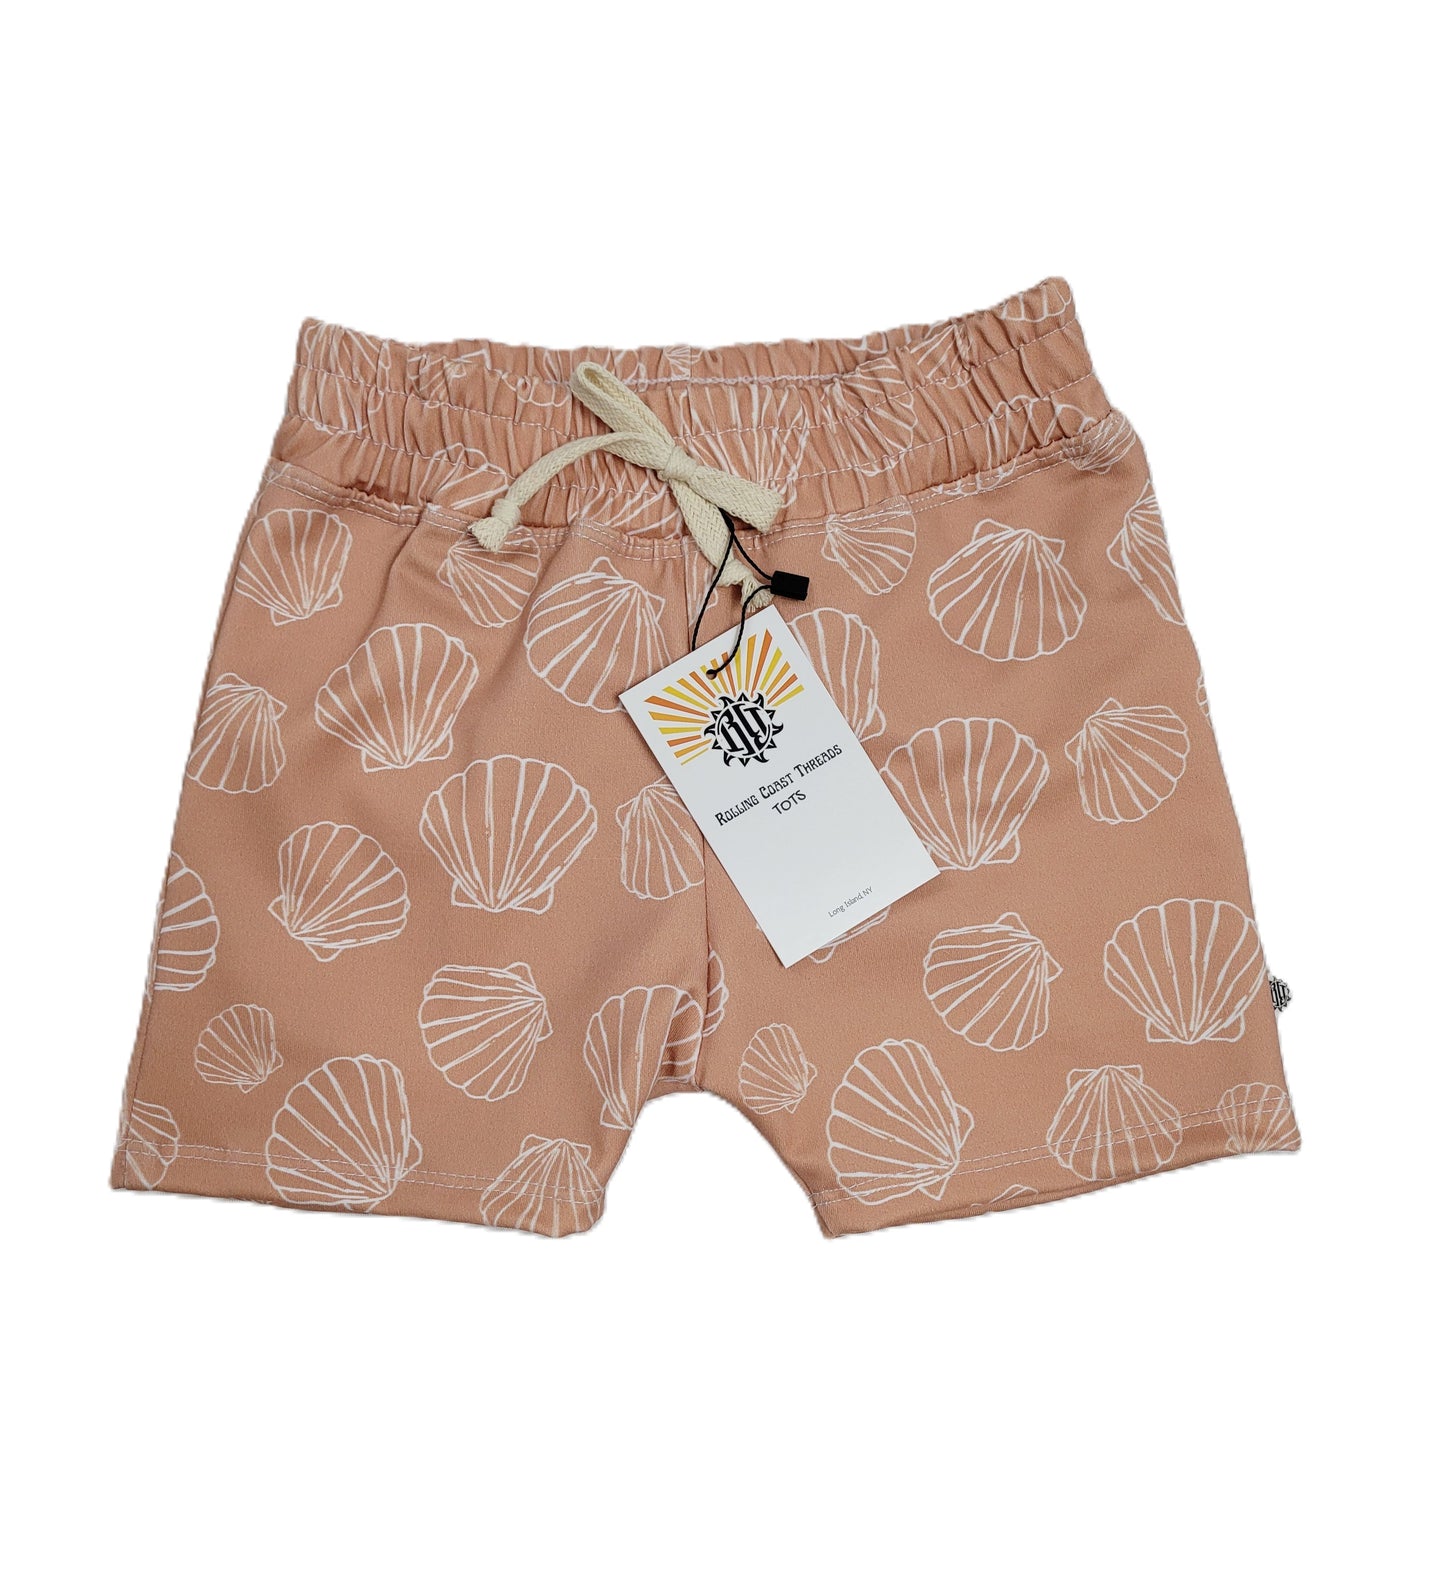 Front of  Boys Copper Swim Shorts with white outlined scallops